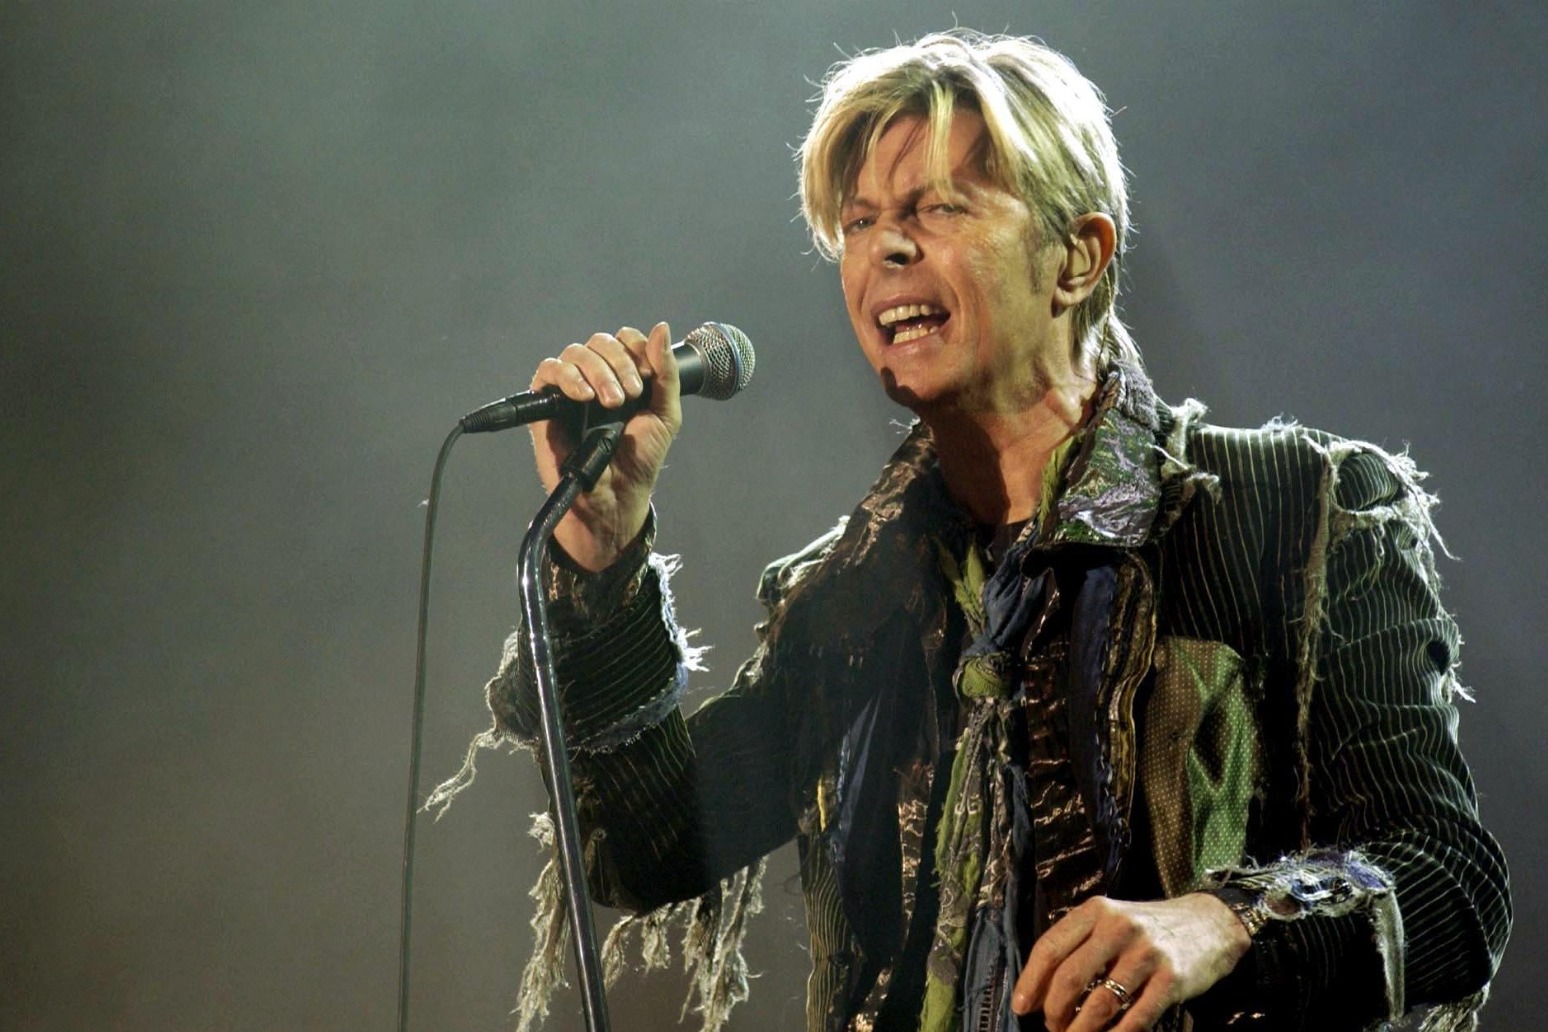 Feature length documentary about the life of David Bowie slated for 2023